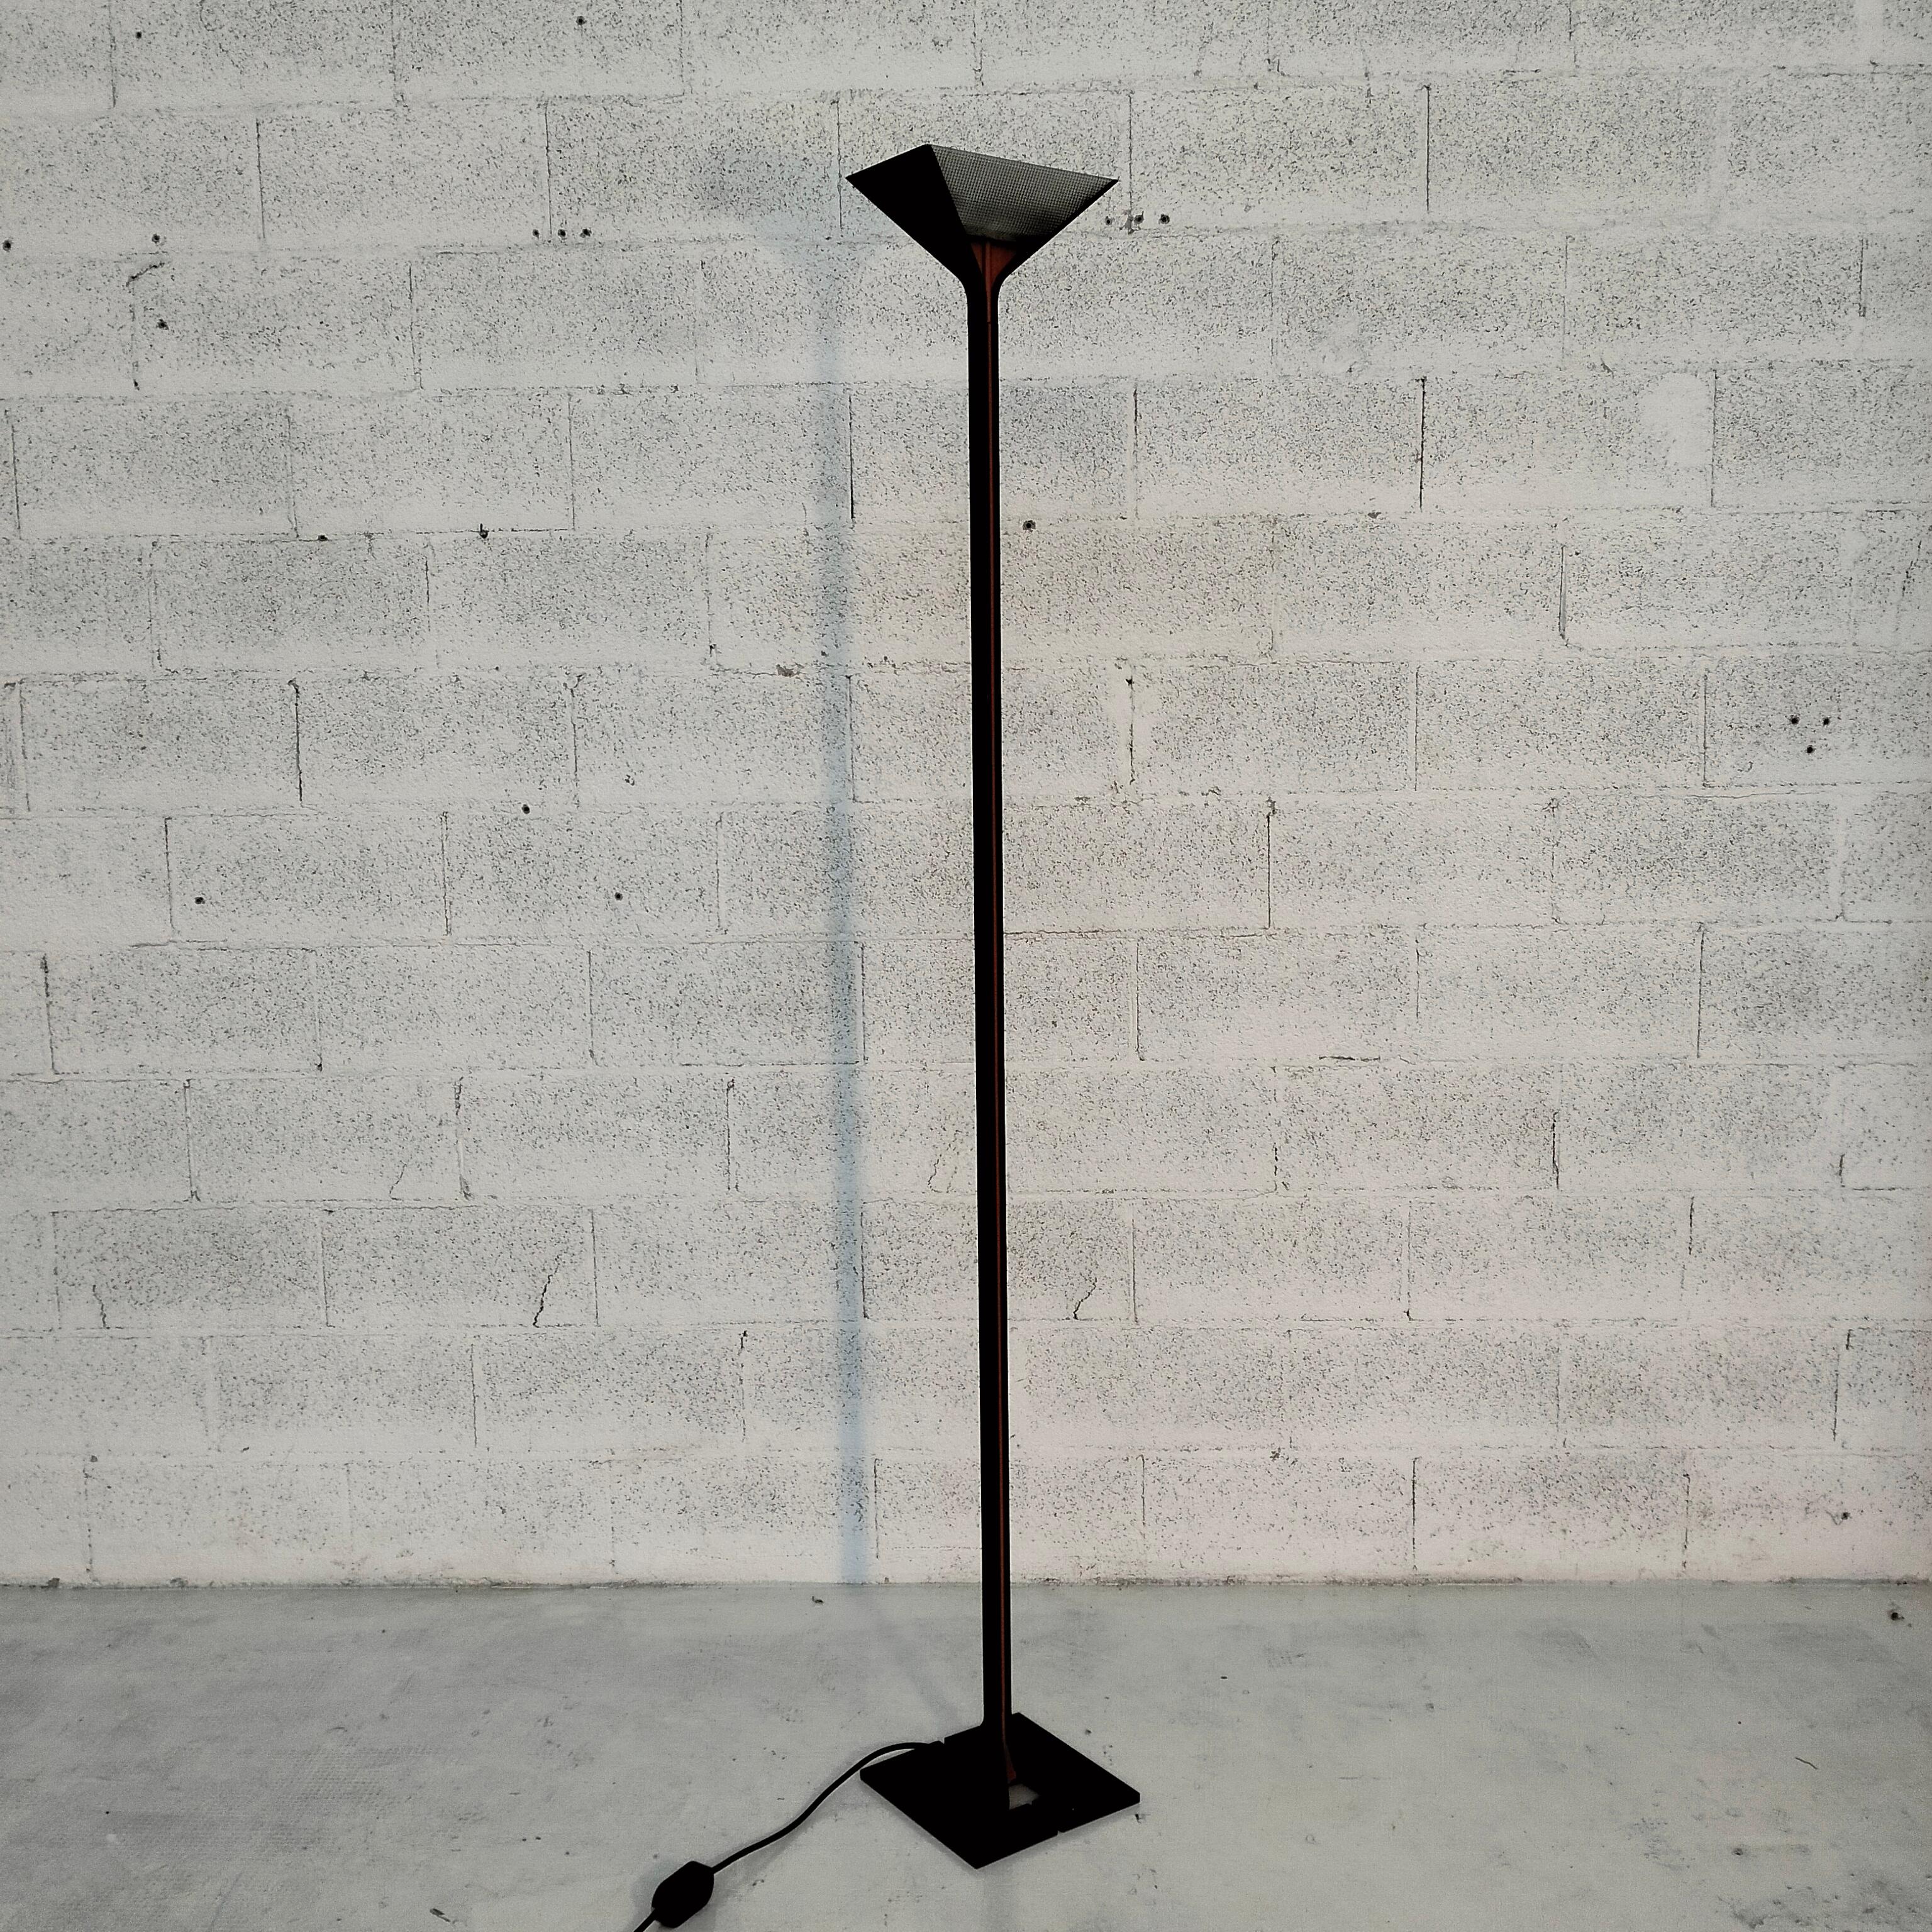 Flos Papillona is a floor lamp with a simple and modern design. Designed by Tobia Scarpa in 1975, it is a classic from those memorable years which saw the birth of most of the lamps that are still very current today.

Born in Venice in 1935, Tobia